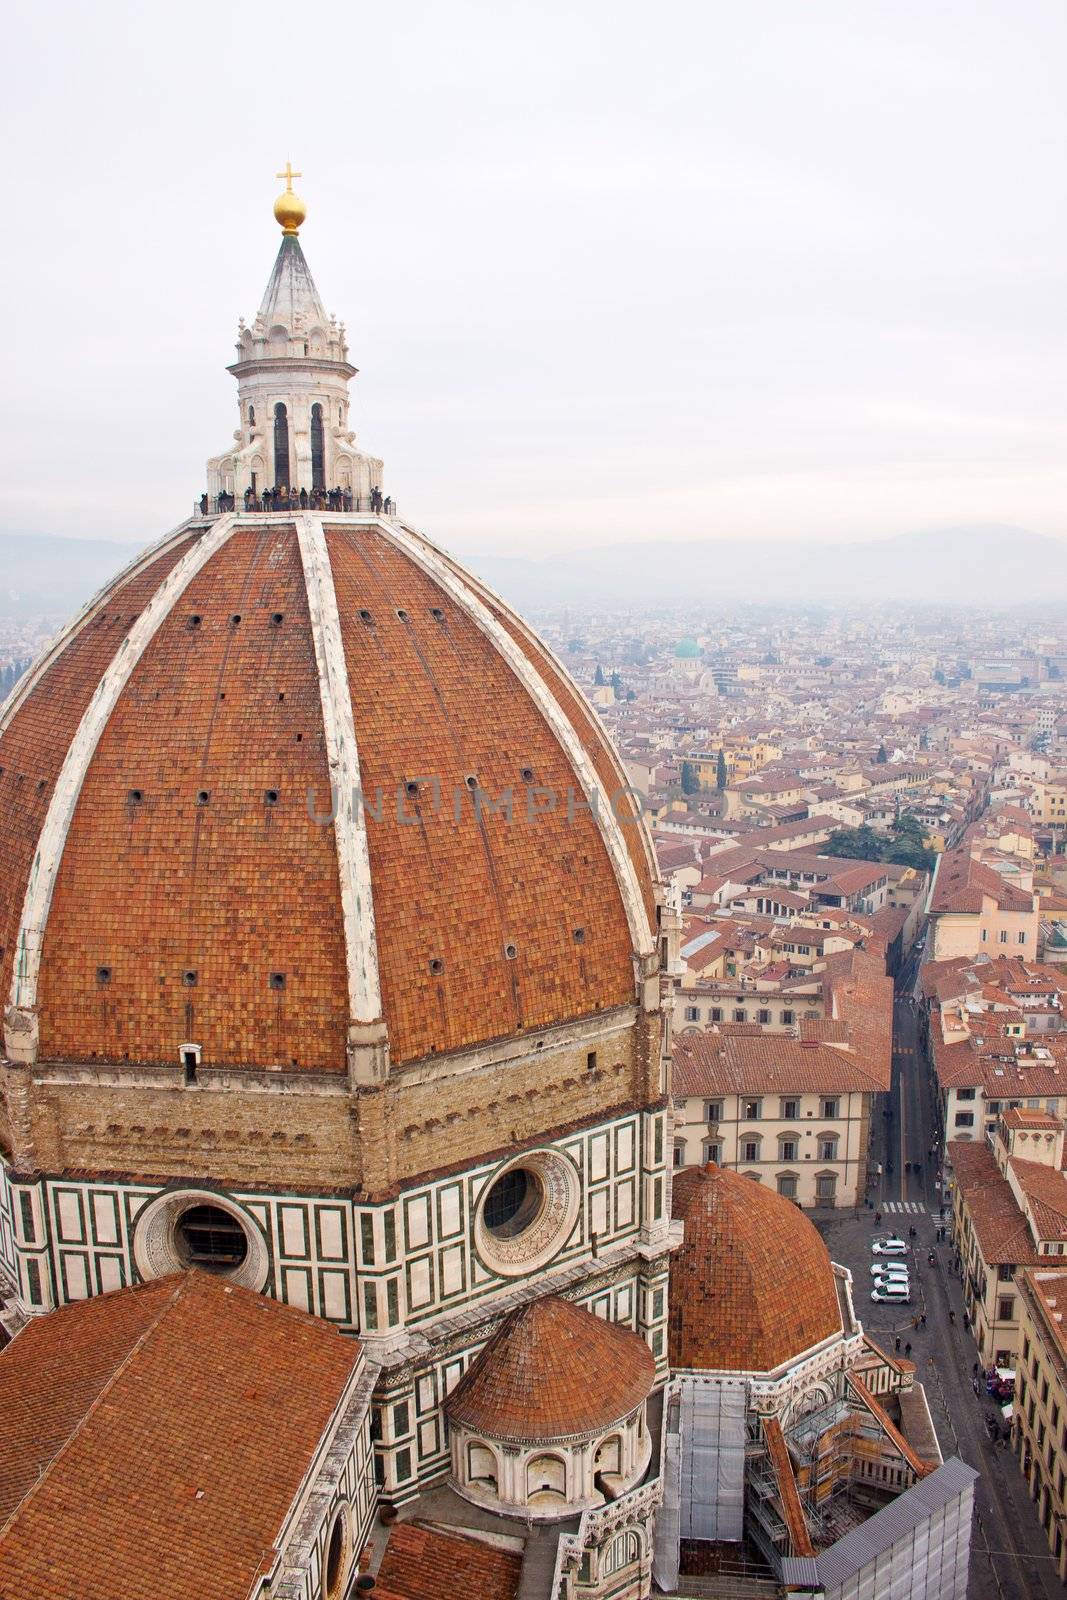 Cathedral Santa Maria del Fiore in Florence, Italy by bloodua